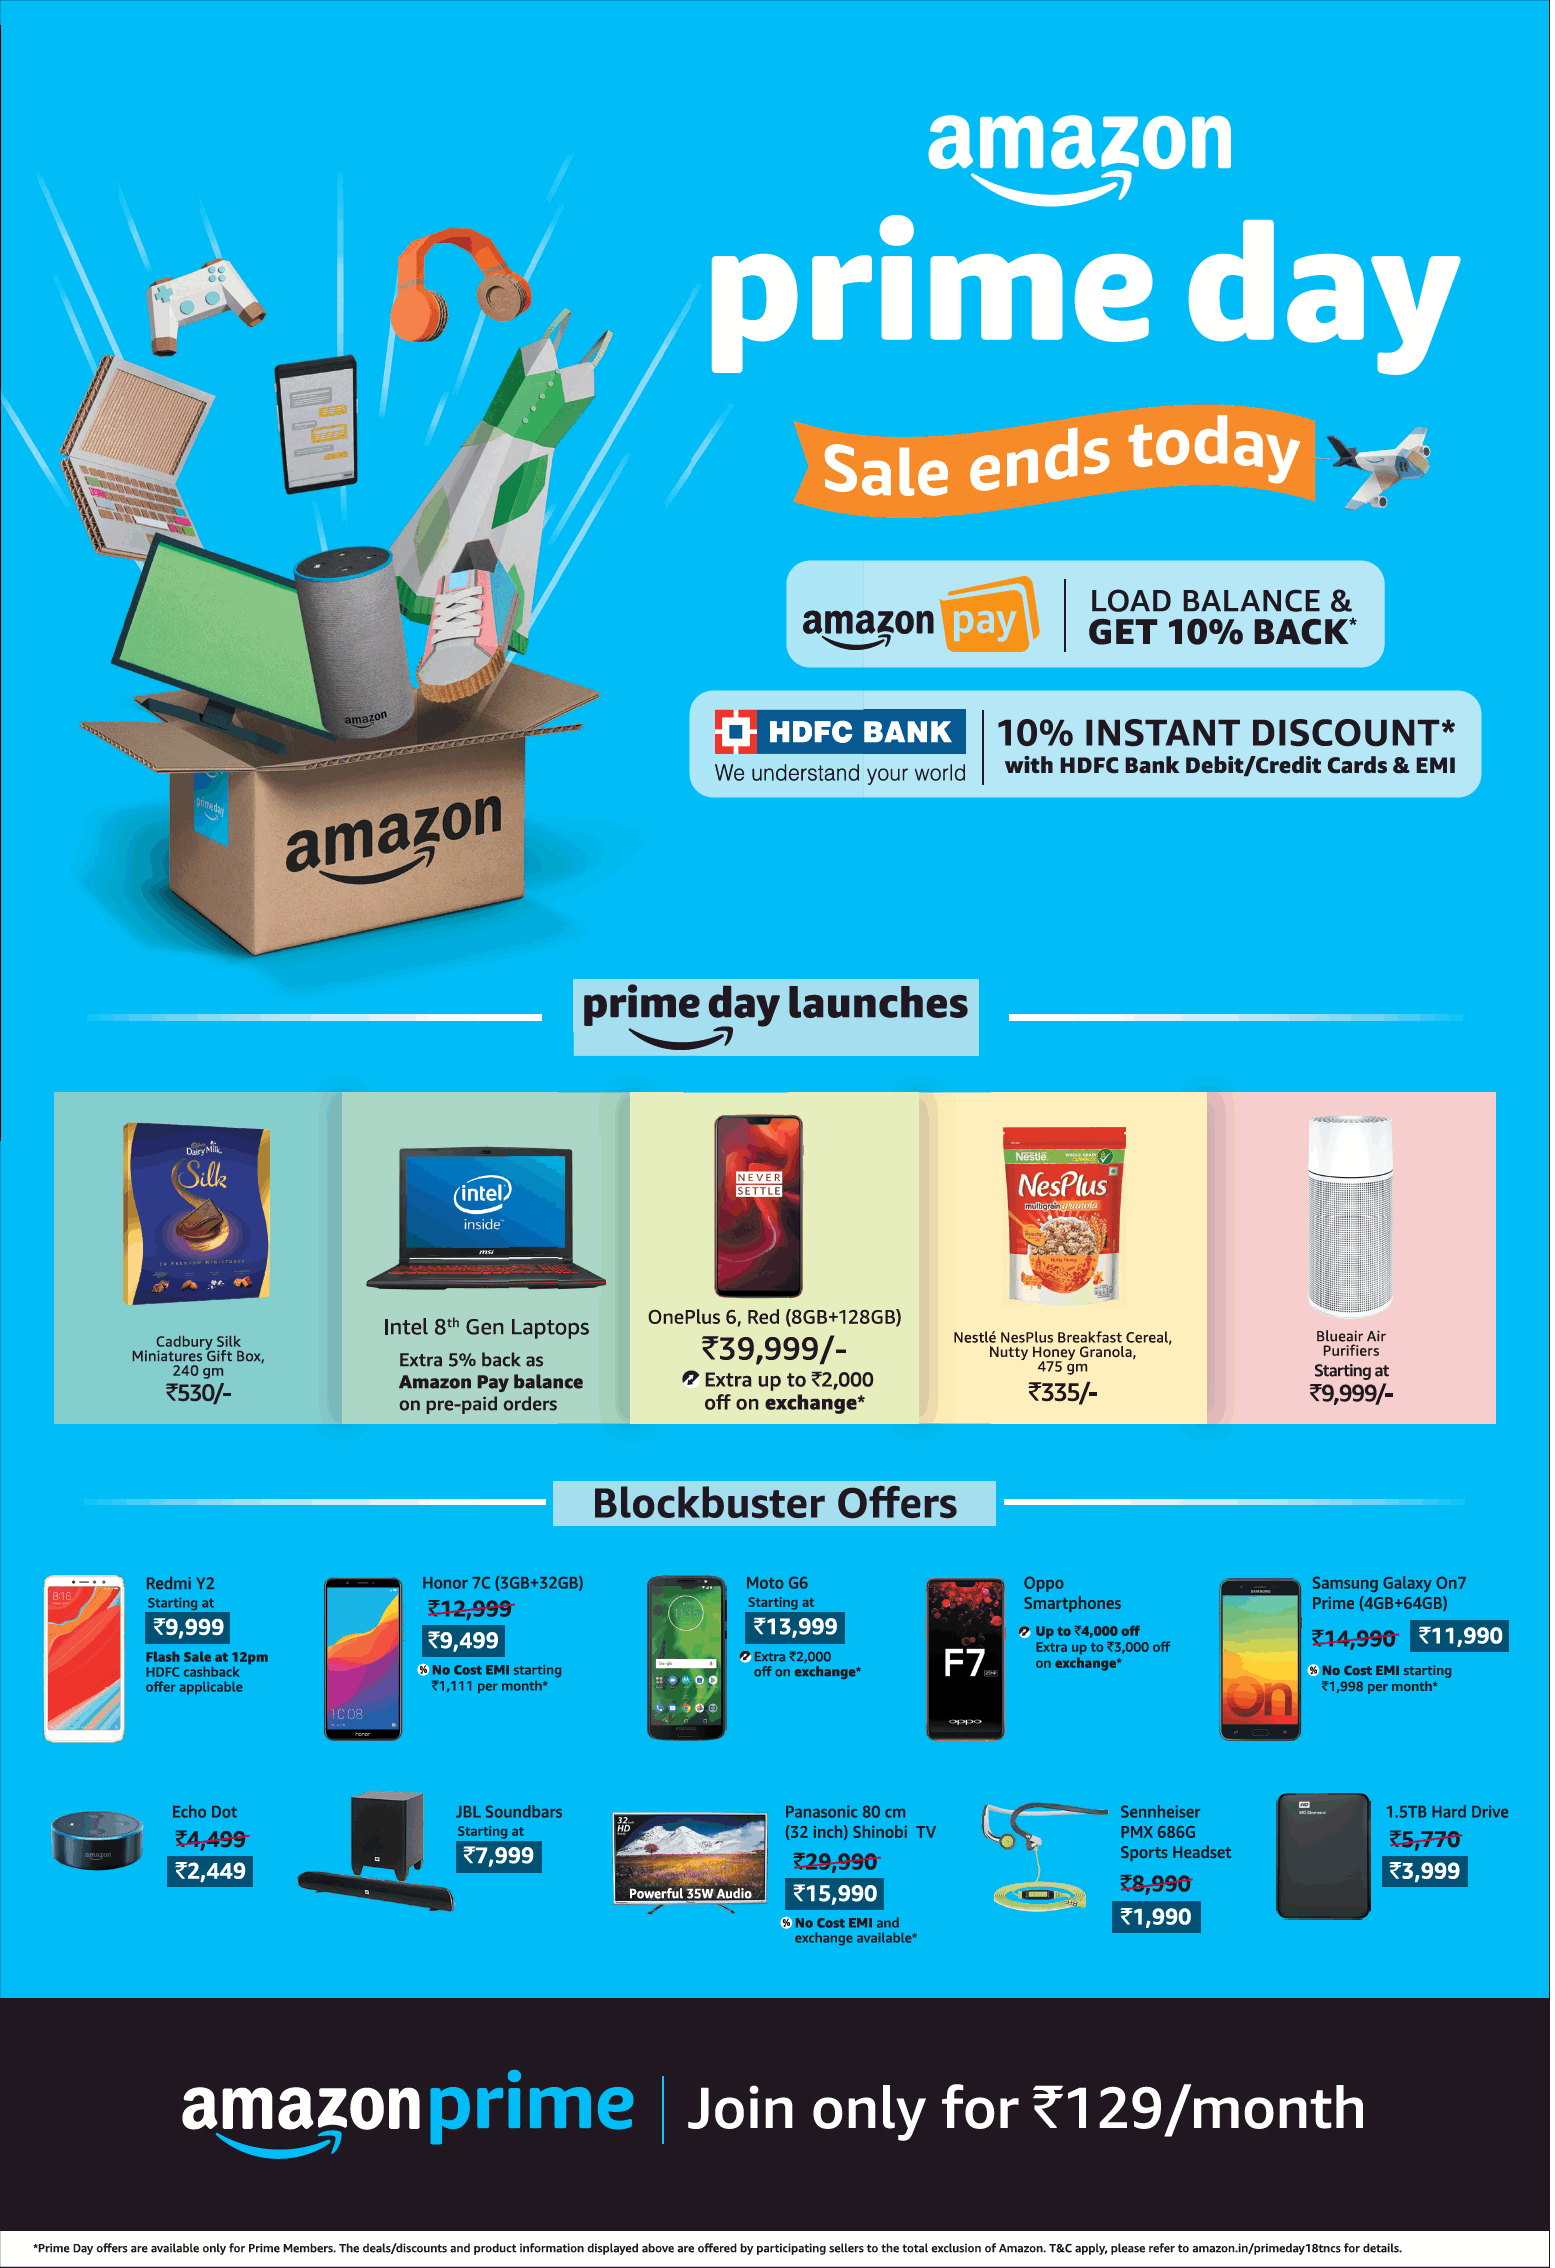 amazon-prime-day-sale-ends-today-load-balance-and-get-10-cashback-ad